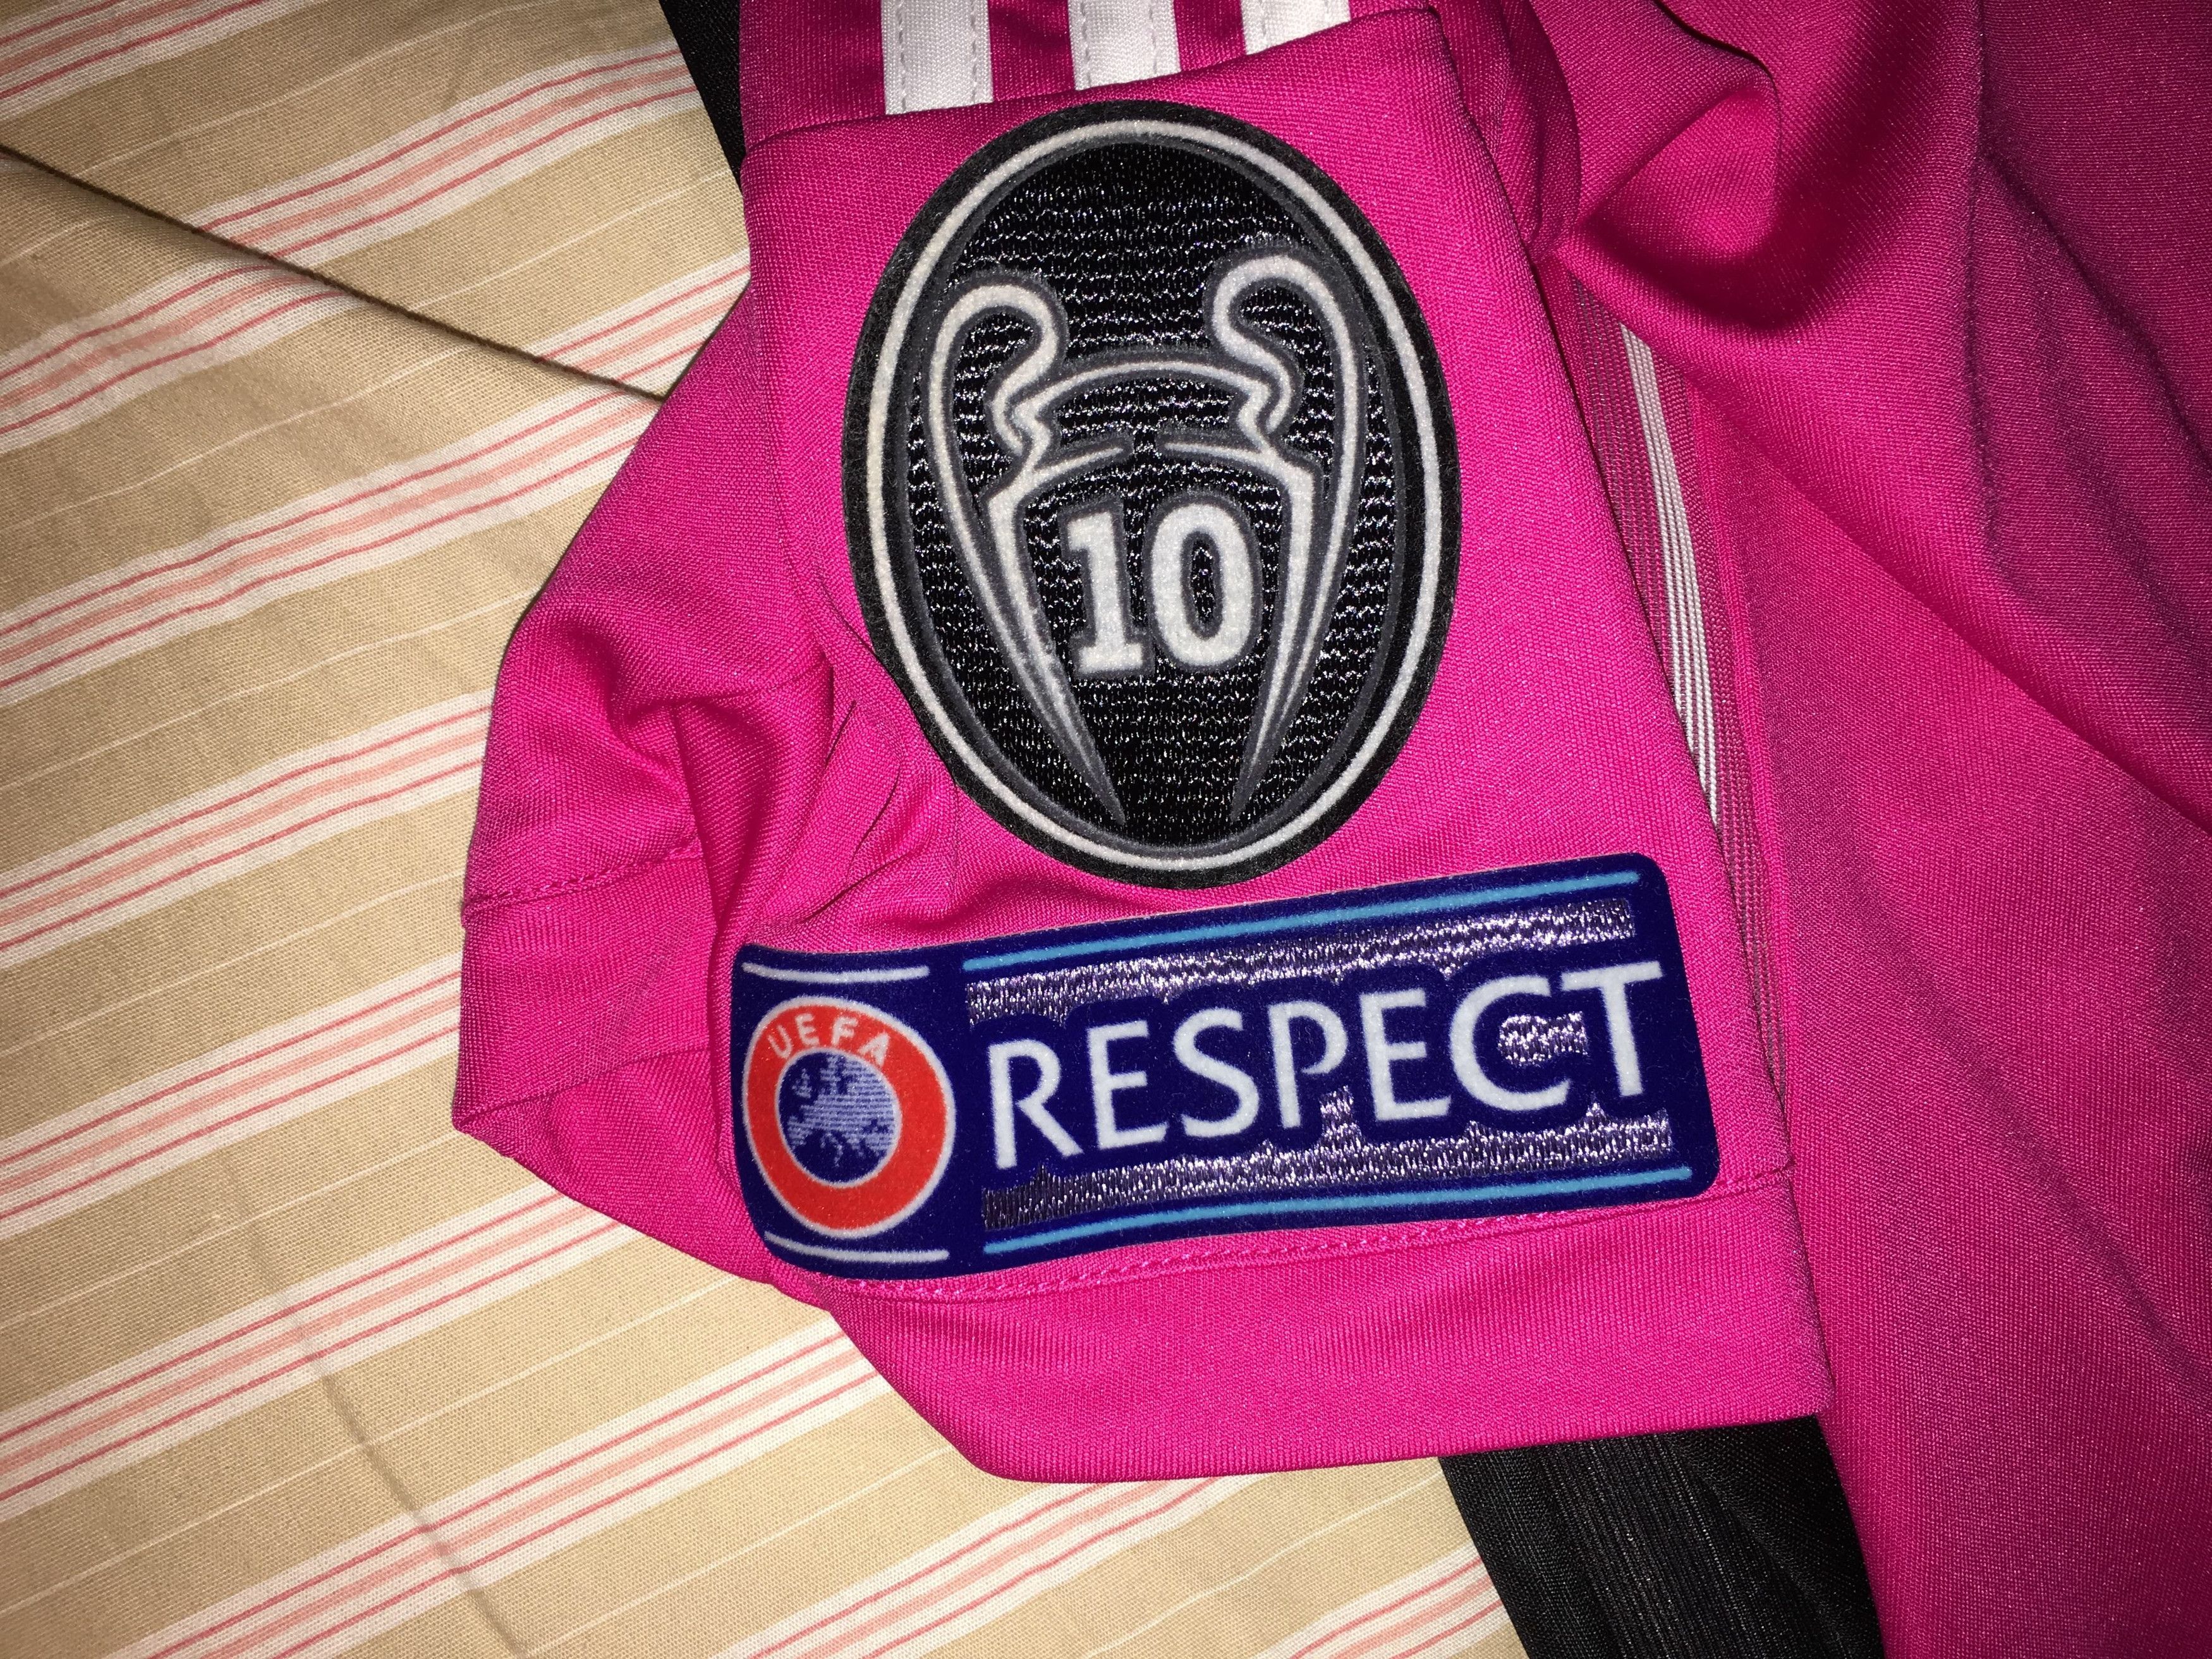 Adidas Pink Real Madrid kit Size US M / EU 48-50 / 2 - 3 Preview